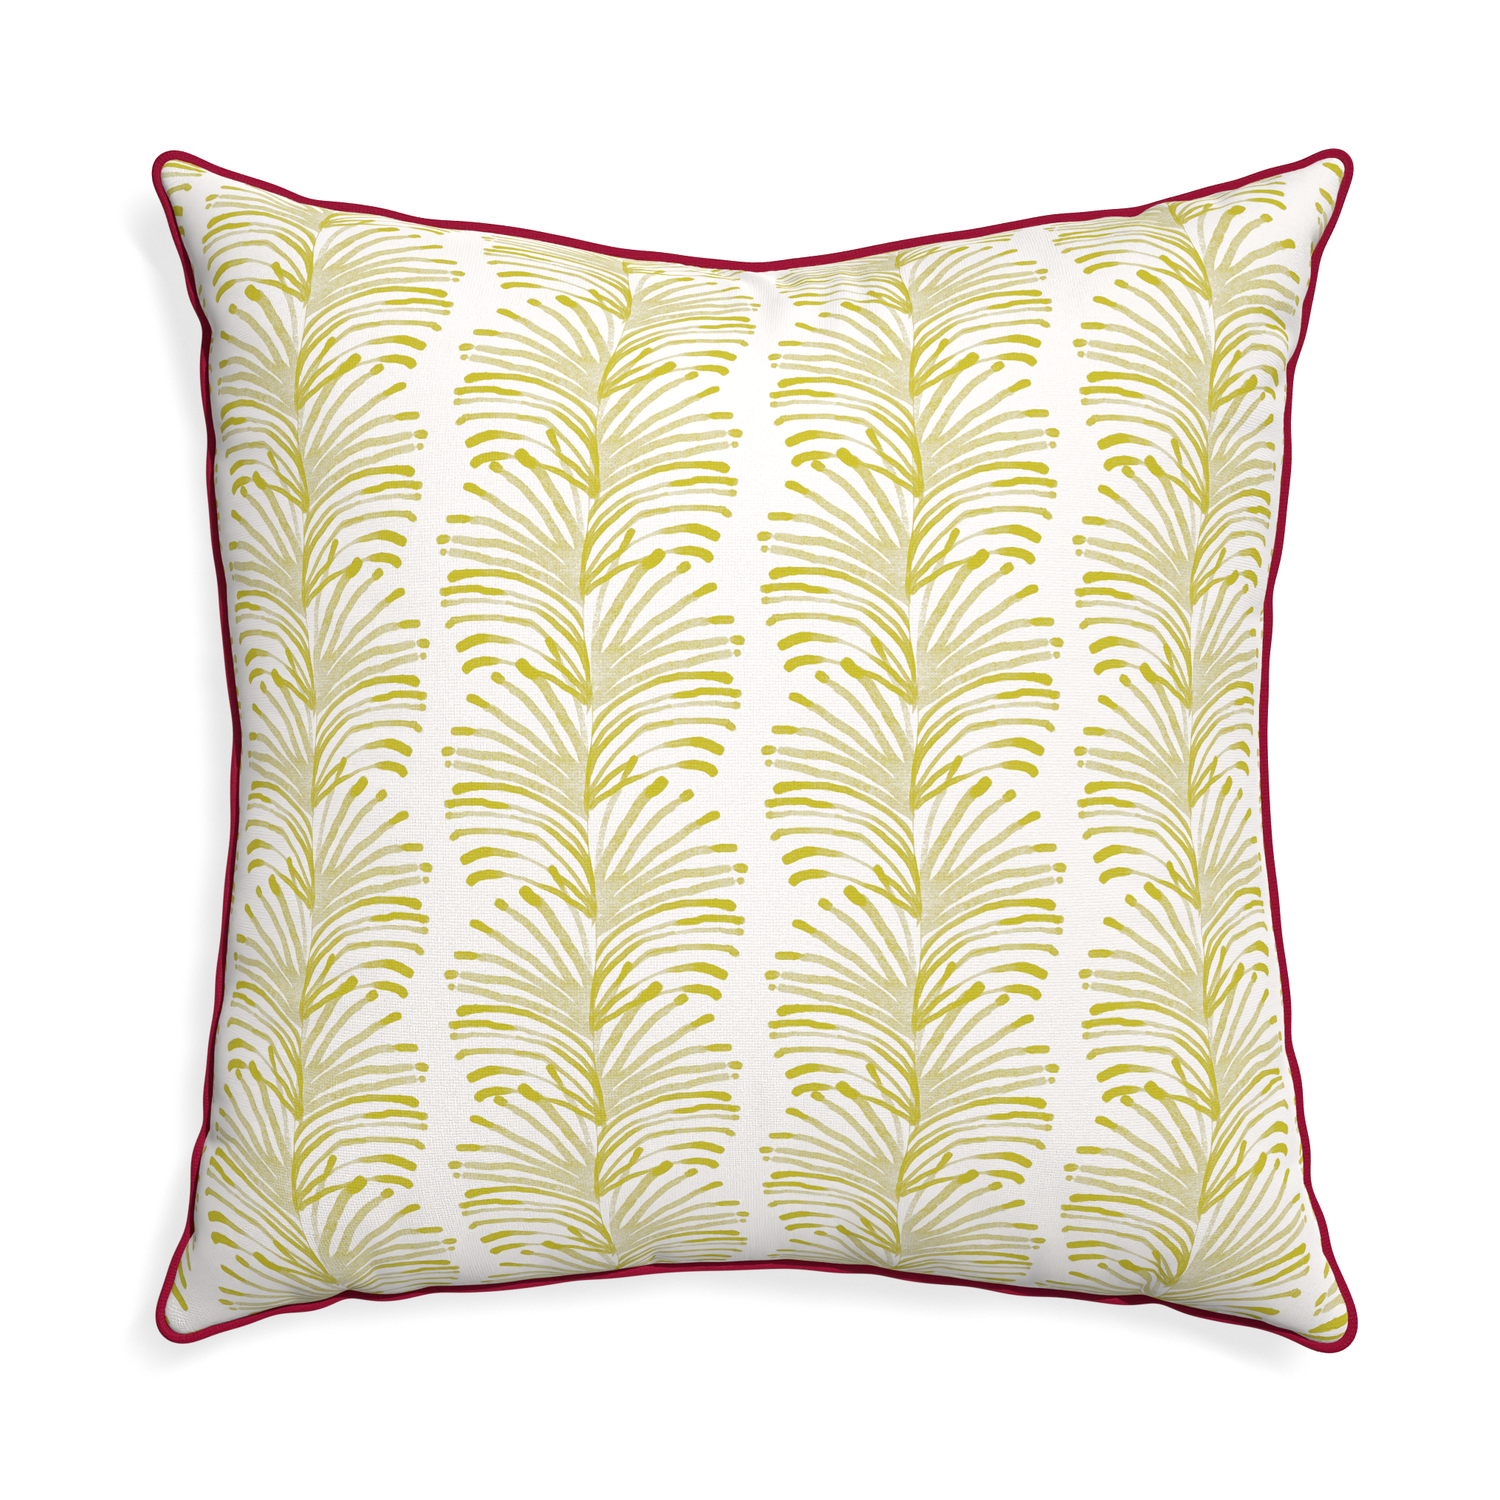 Euro-sham emma chartreuse custom yellow stripe chartreusepillow with raspberry piping on white background